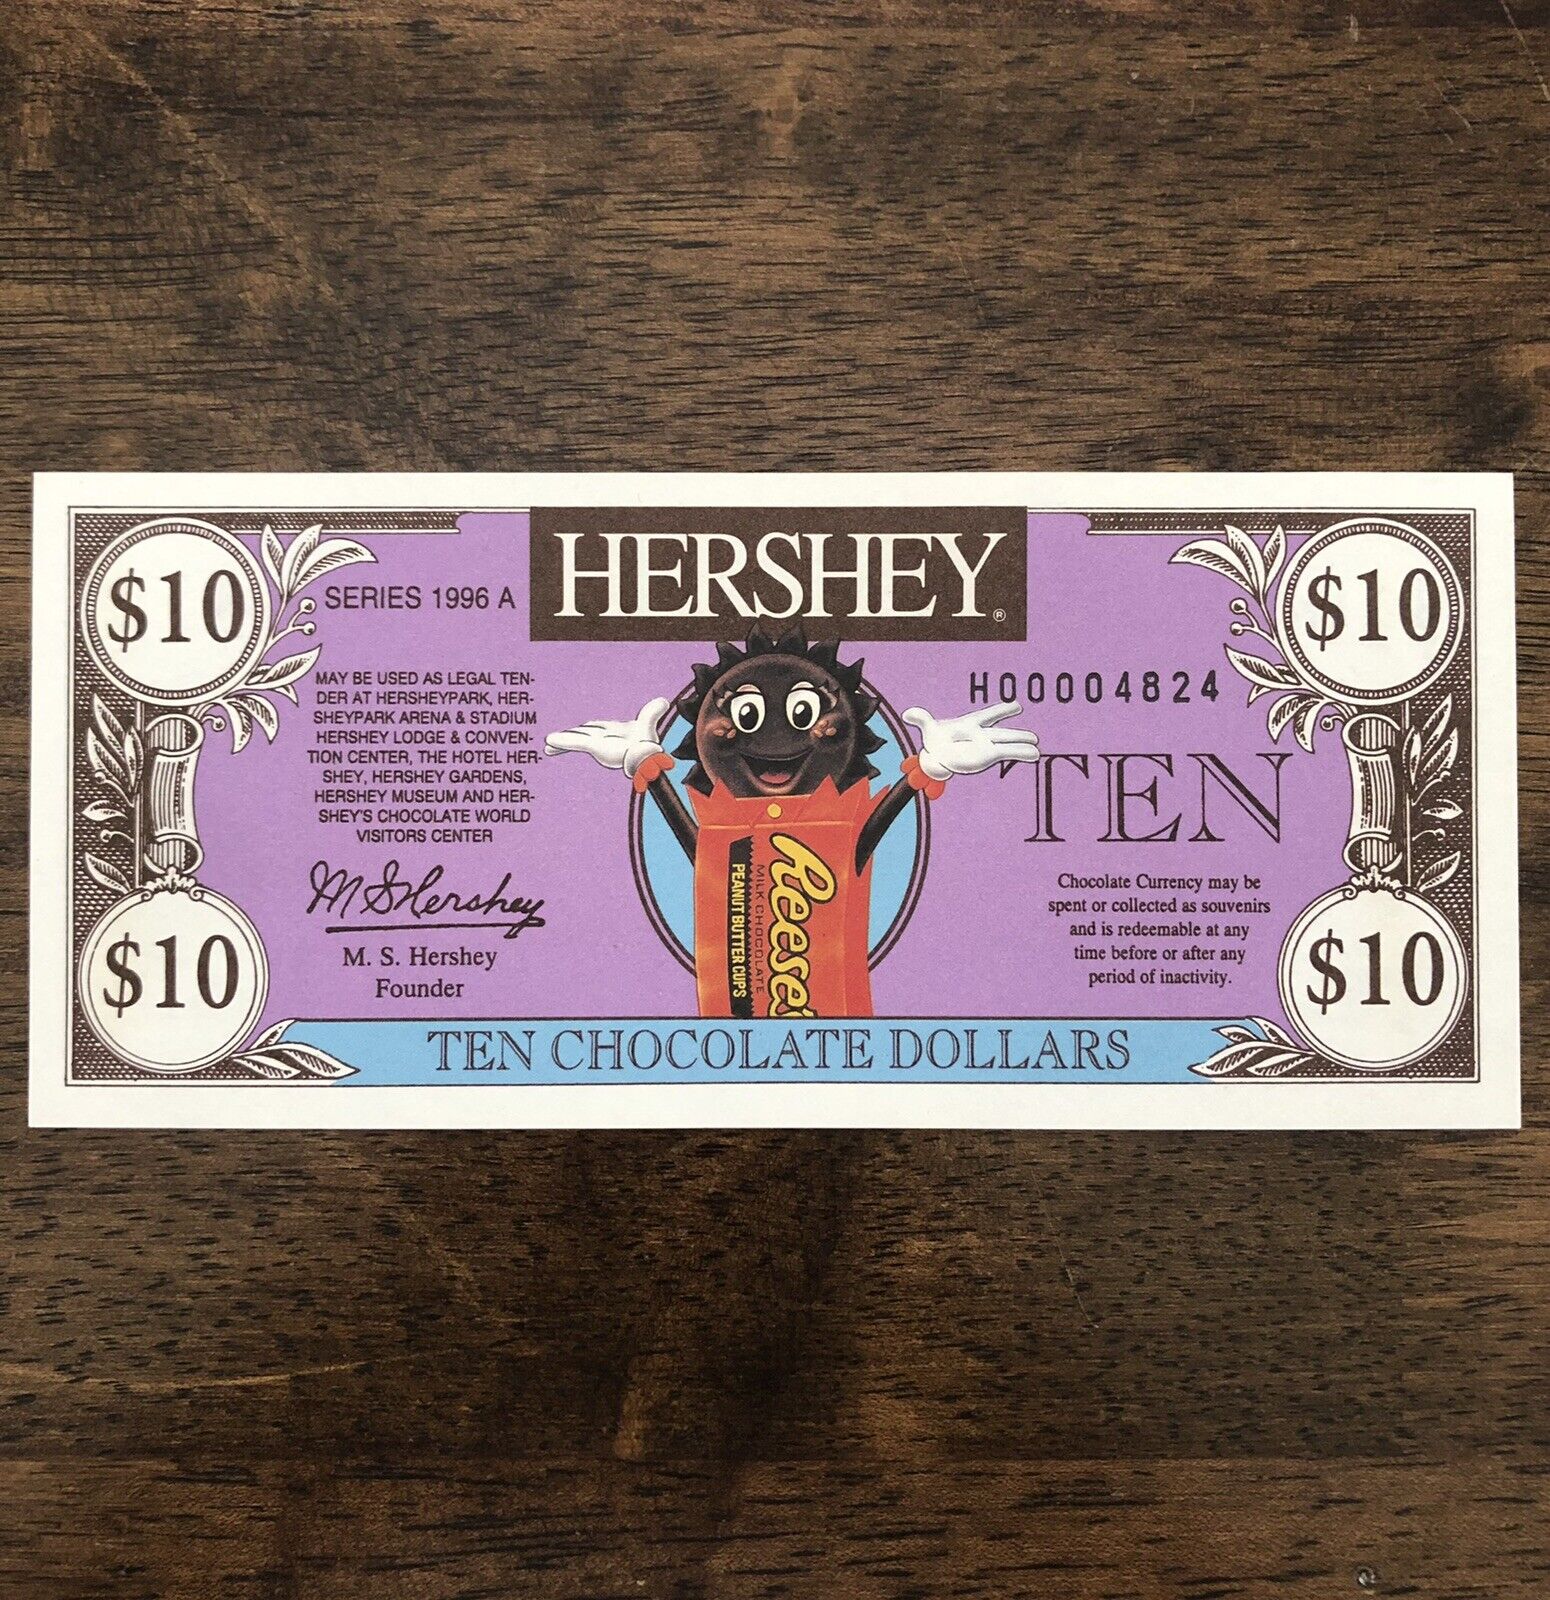 1996 Extremely RARE $10 Hershey Chocolate Dollar H00004824 Uncirculated + Env.